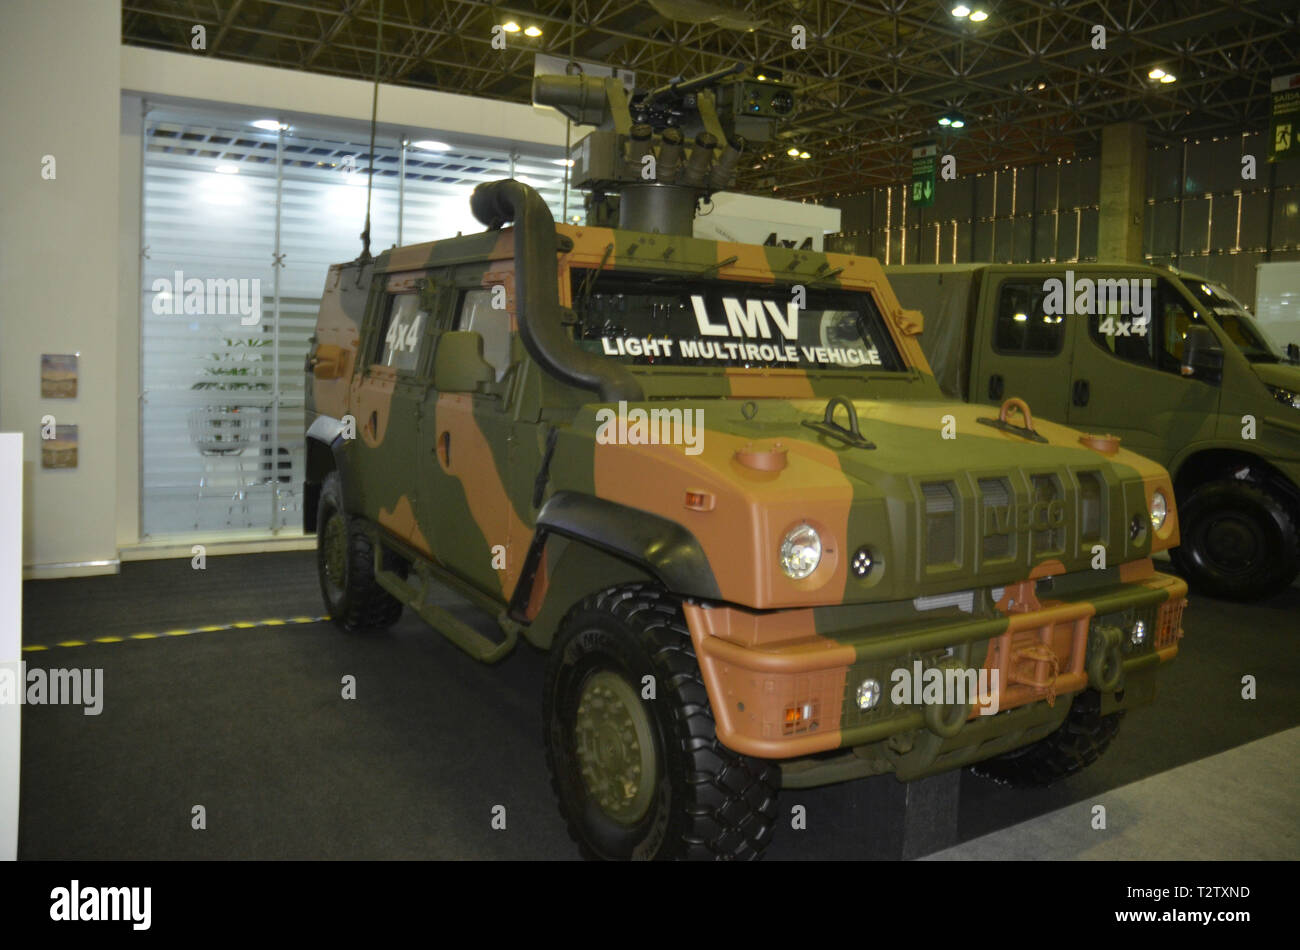 Rio De Janeiro, Brazil. 04th Apr, 2019. Iveco presents LMV vehicle during LAAD Defense &amp; Security International Defense and Security Fair, the largest and most rtant defense and security fair in Latin Ame America. The exhibition brings together manufacturers and suppliers of technologies for the Armed Forces, Special Forces, Police and Managers is held this Thursday (04) in the complex of events and conventions of Riocentro in Barra da Tijuca in the western zone of the city of Rio de Janeiro, RJ. Credit: Luiz Gomes/FotoArena/Alamy Live News Stock Photo